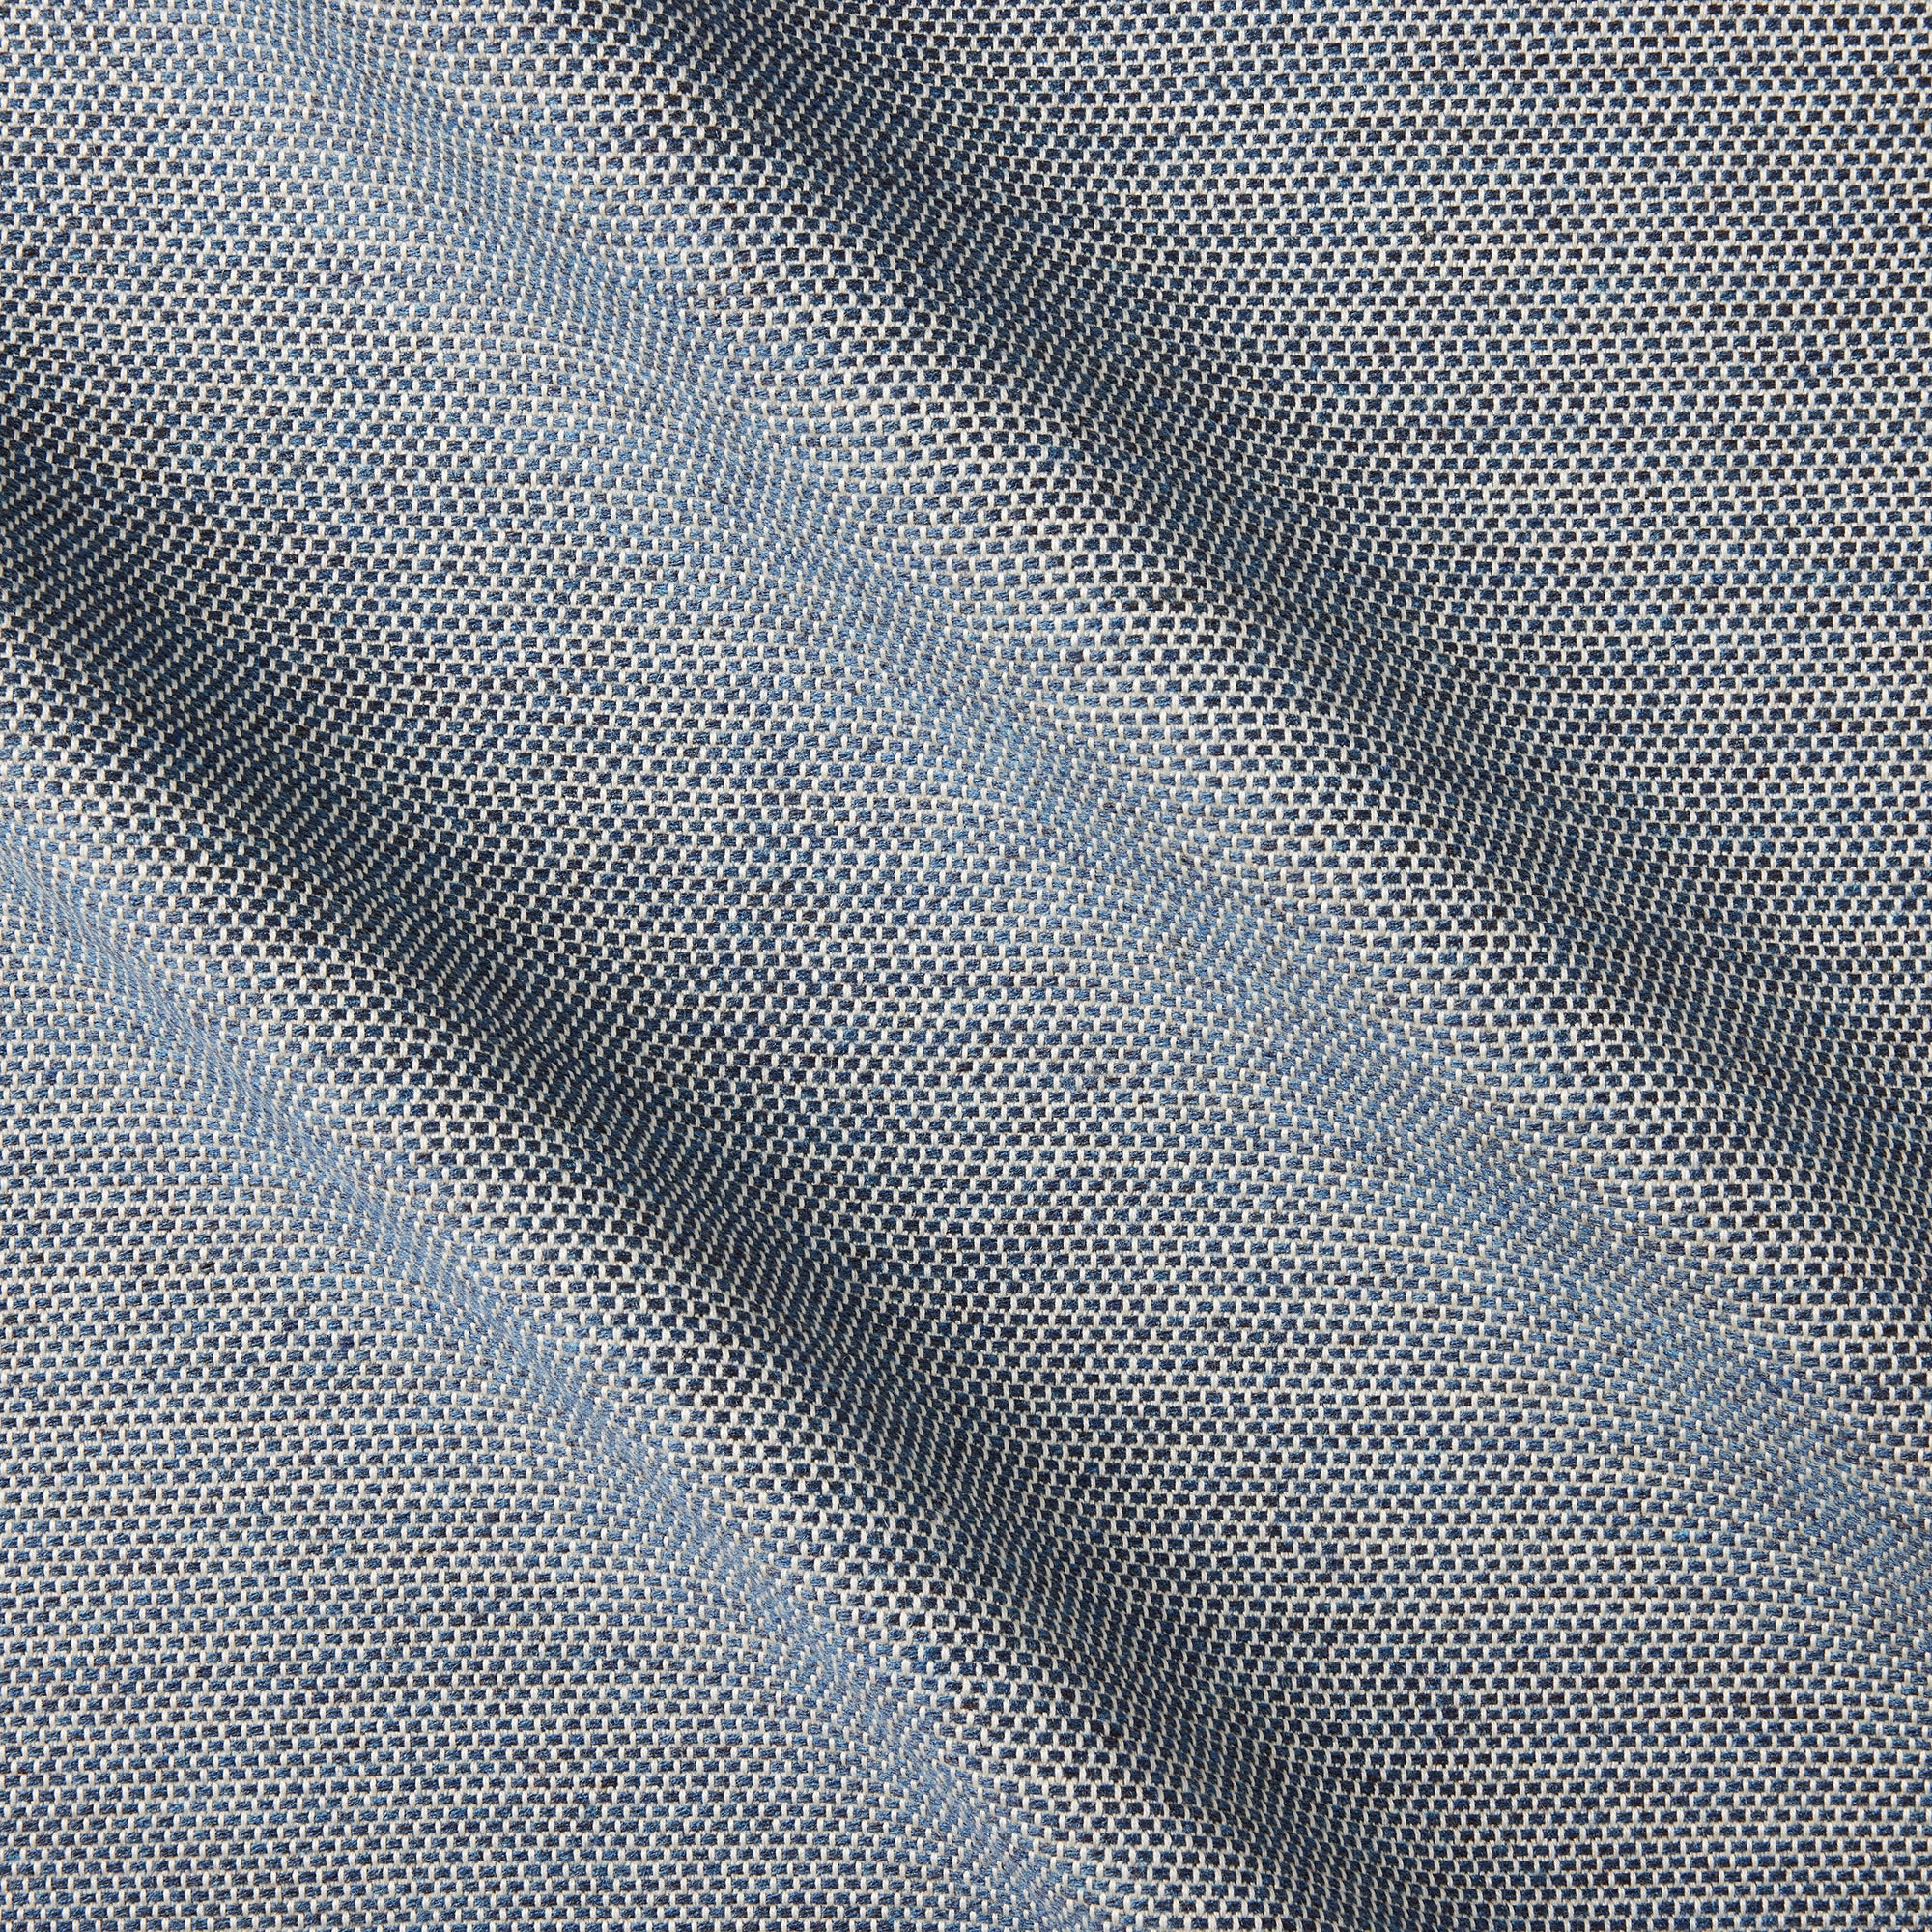 Sand 100% Cotton Bull Denim Fabric by the Yard Pre Washed 400GSM